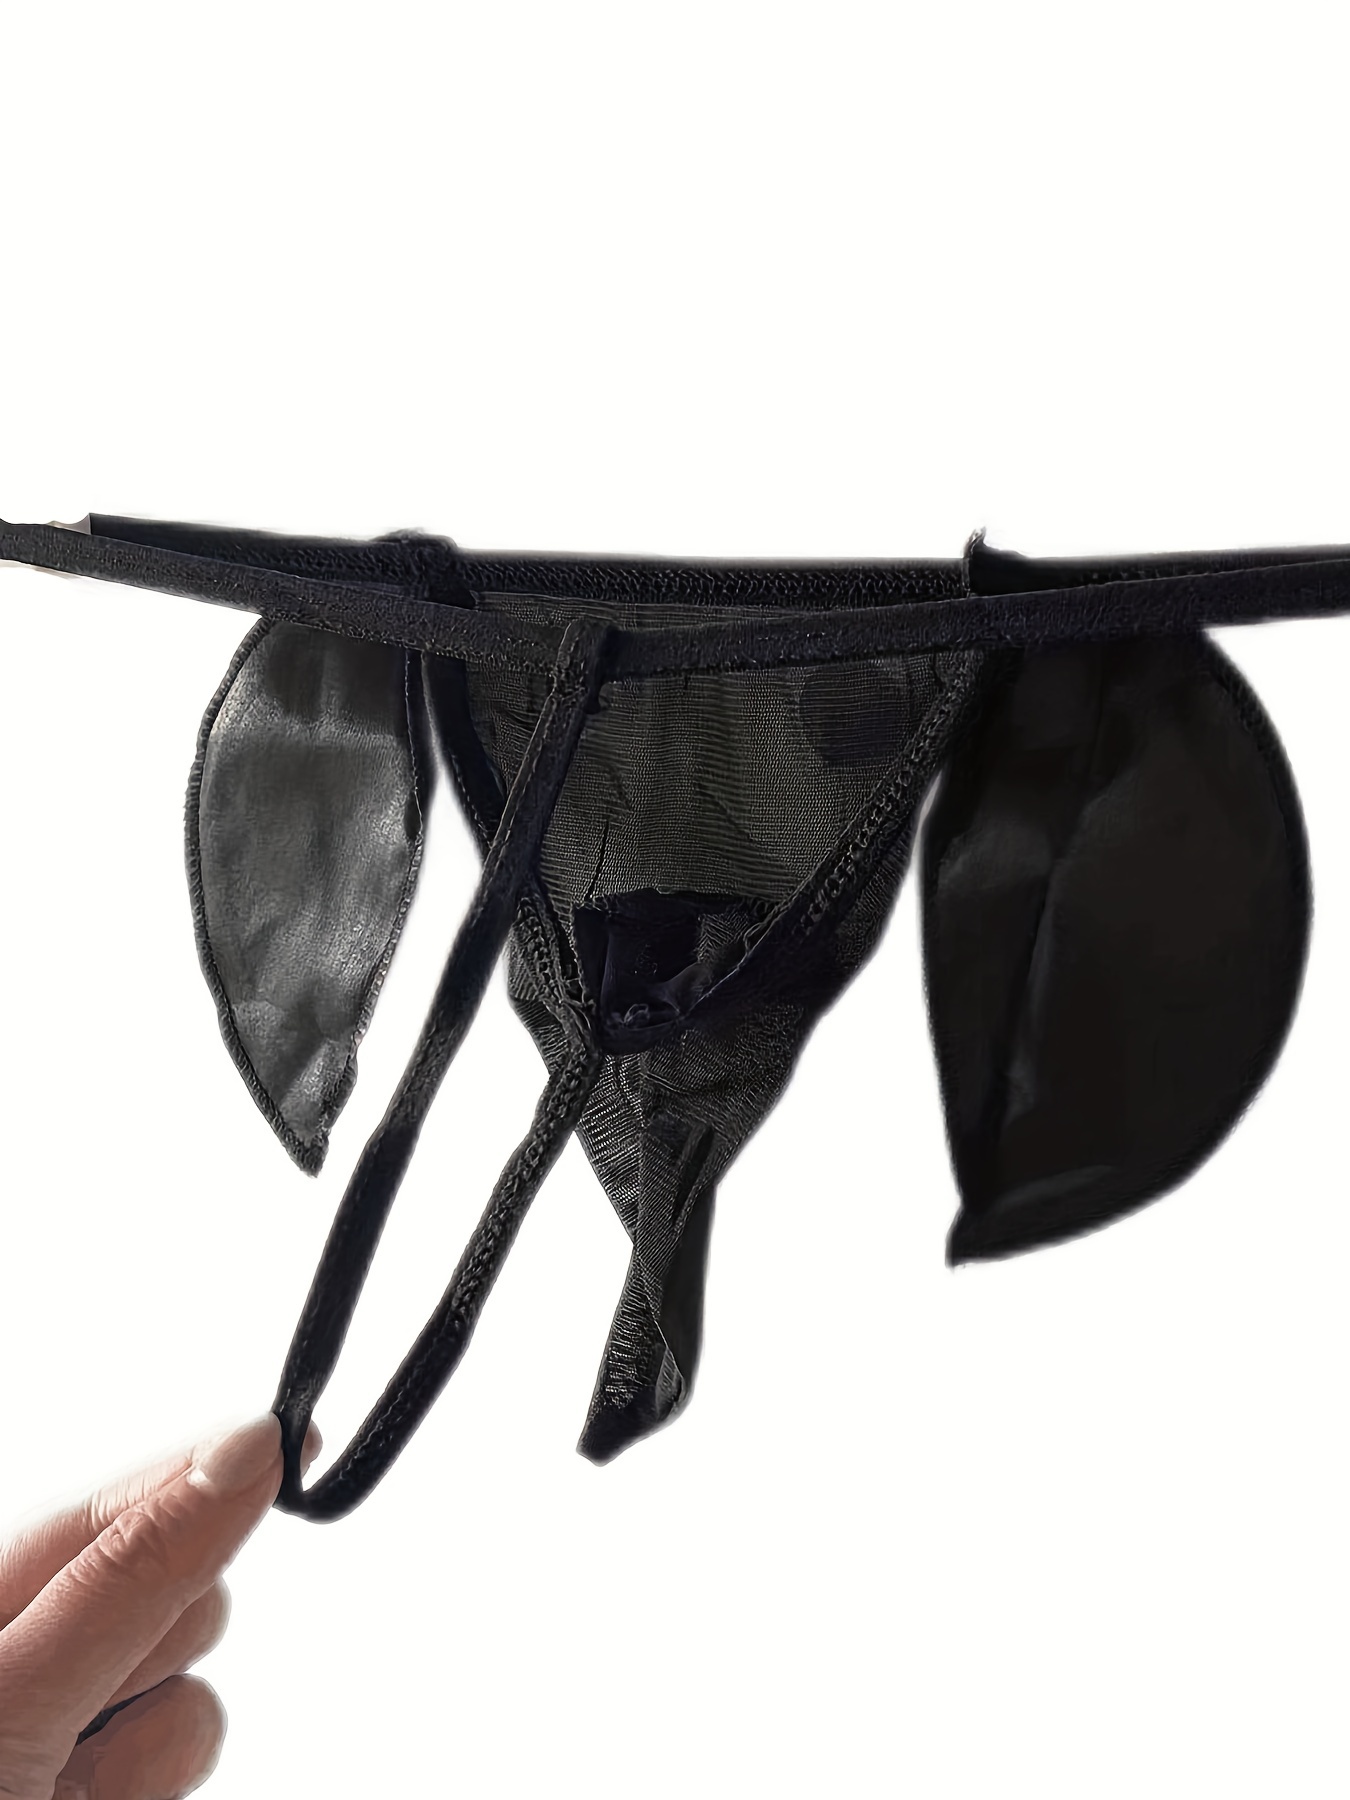 Mens Sexy Elephant Undies G String Thong Leopard Novelty Bucks Night  Stripper Silve : : Clothing, Shoes & Accessories